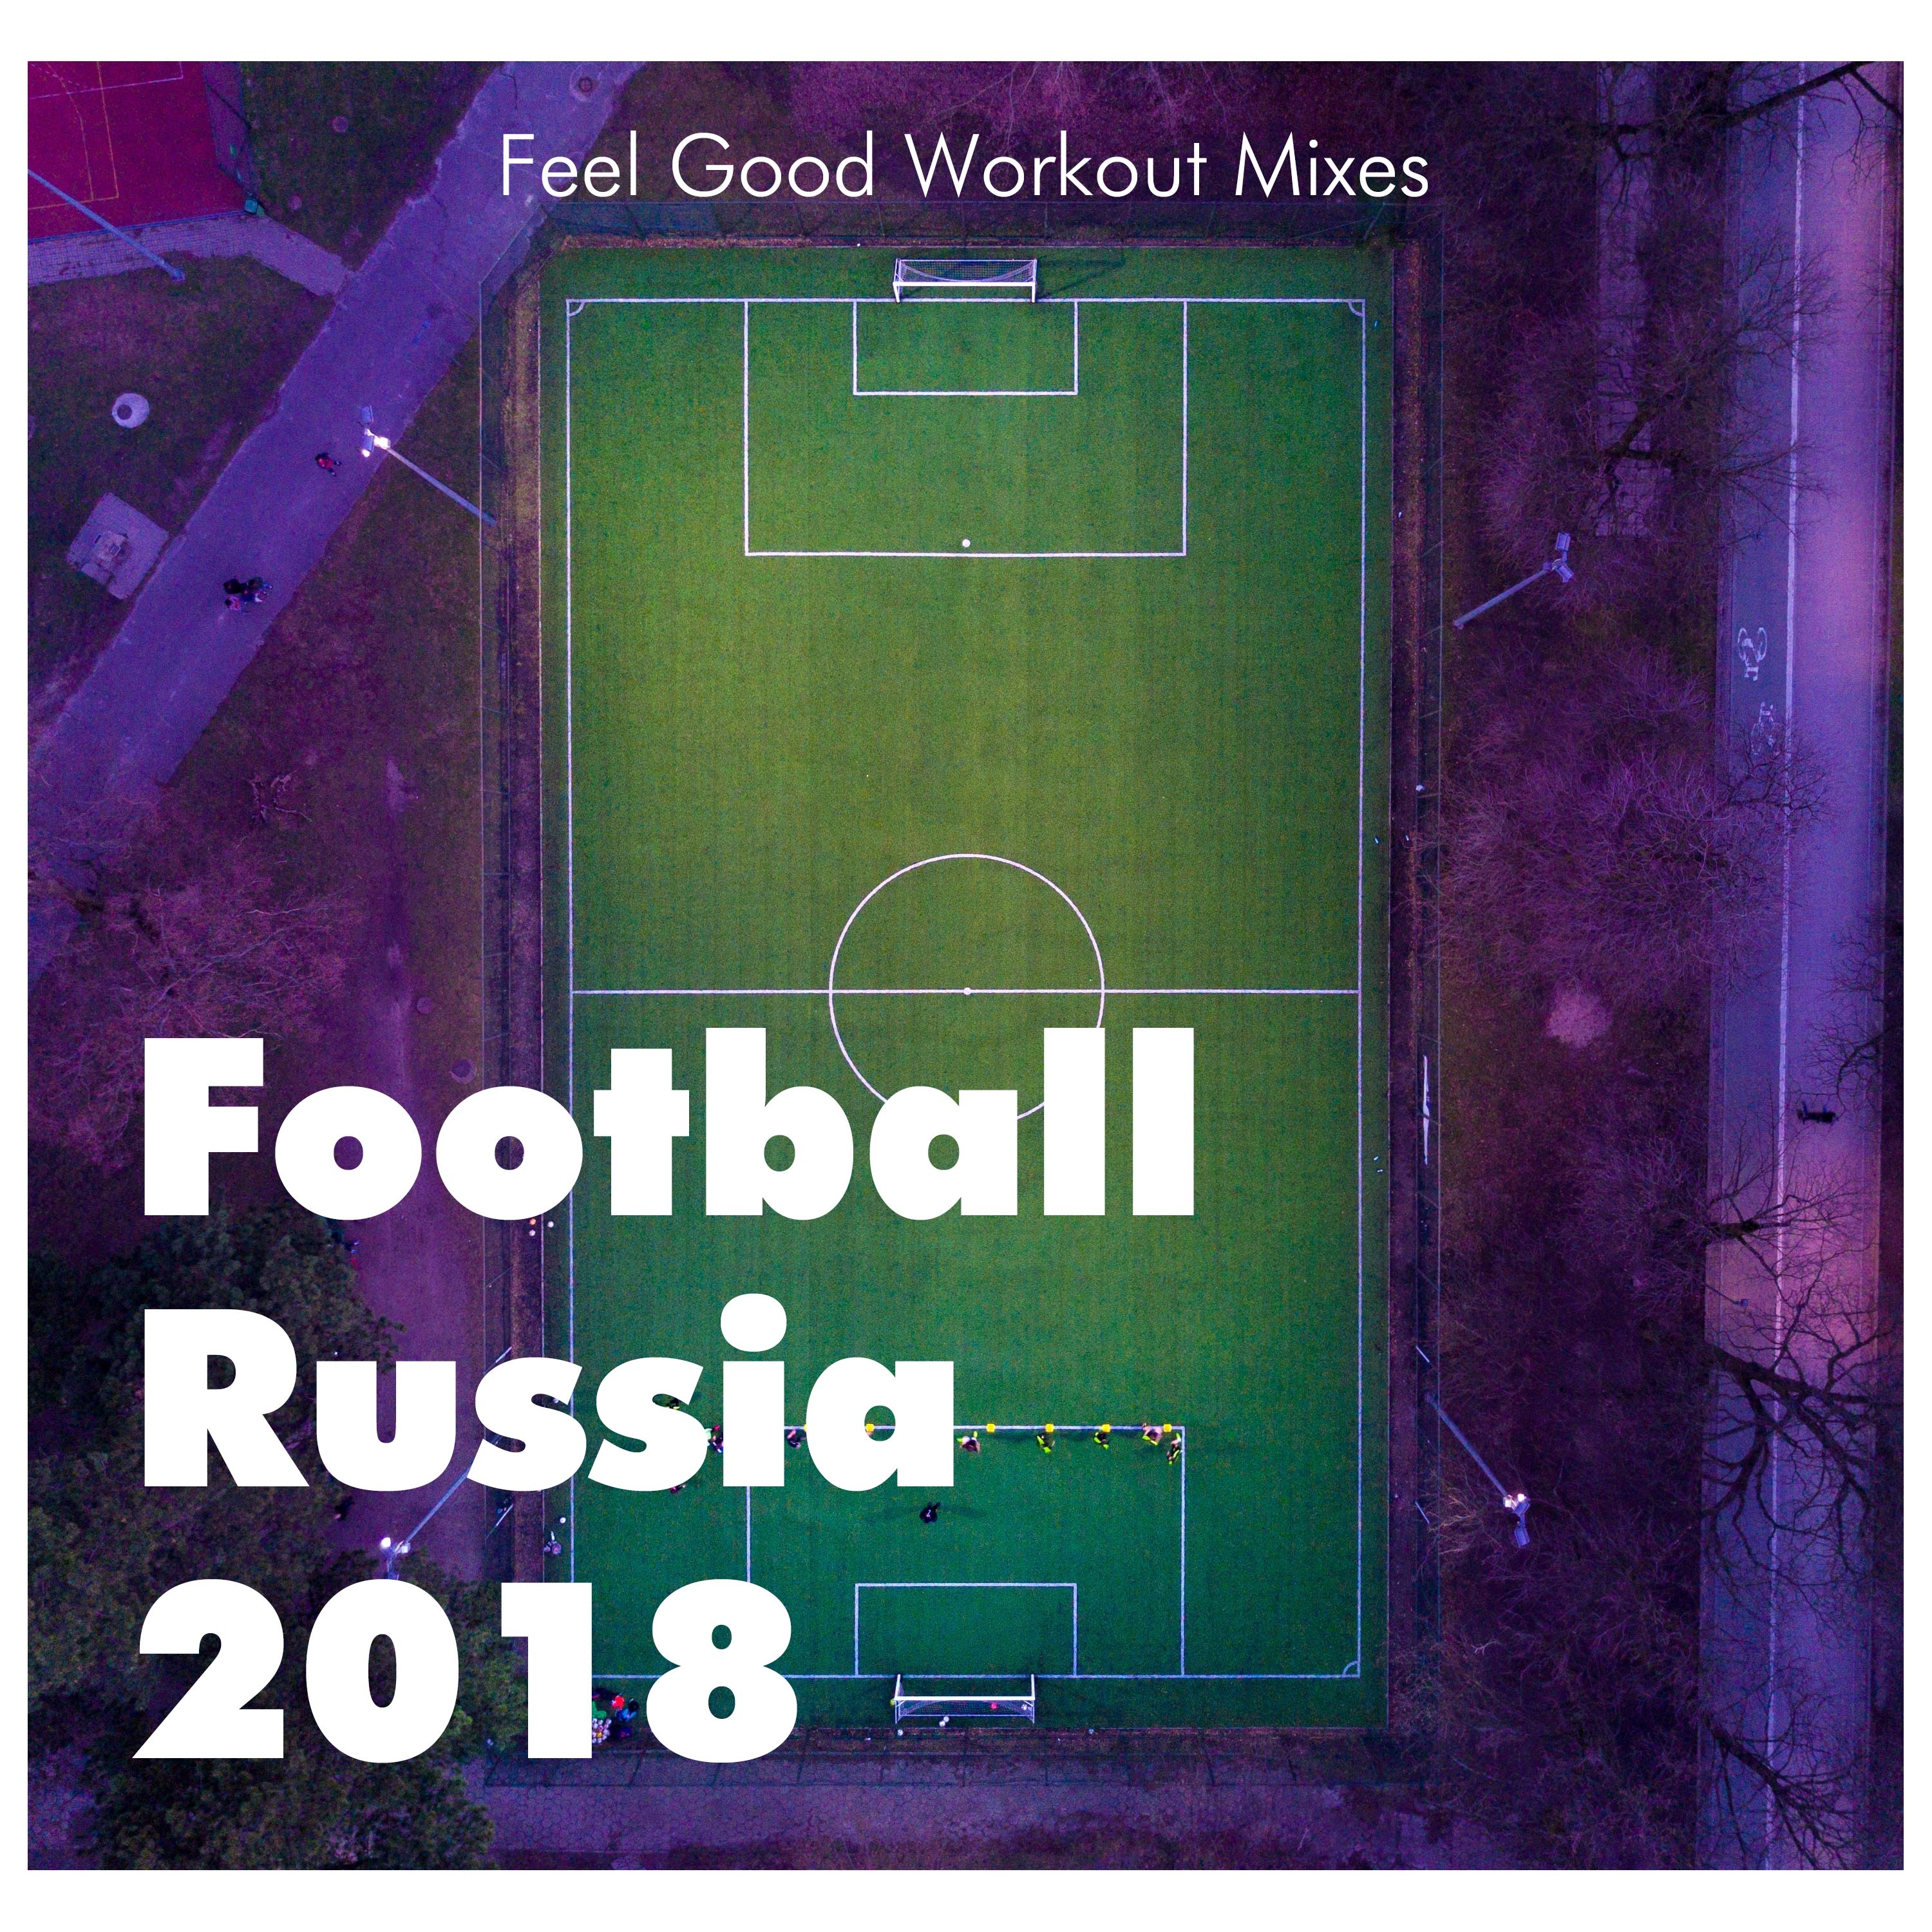 Football Russia 2018 - [] Feel Good Workout Mixes Ideal for Gym, Jogging, Running, Cycling